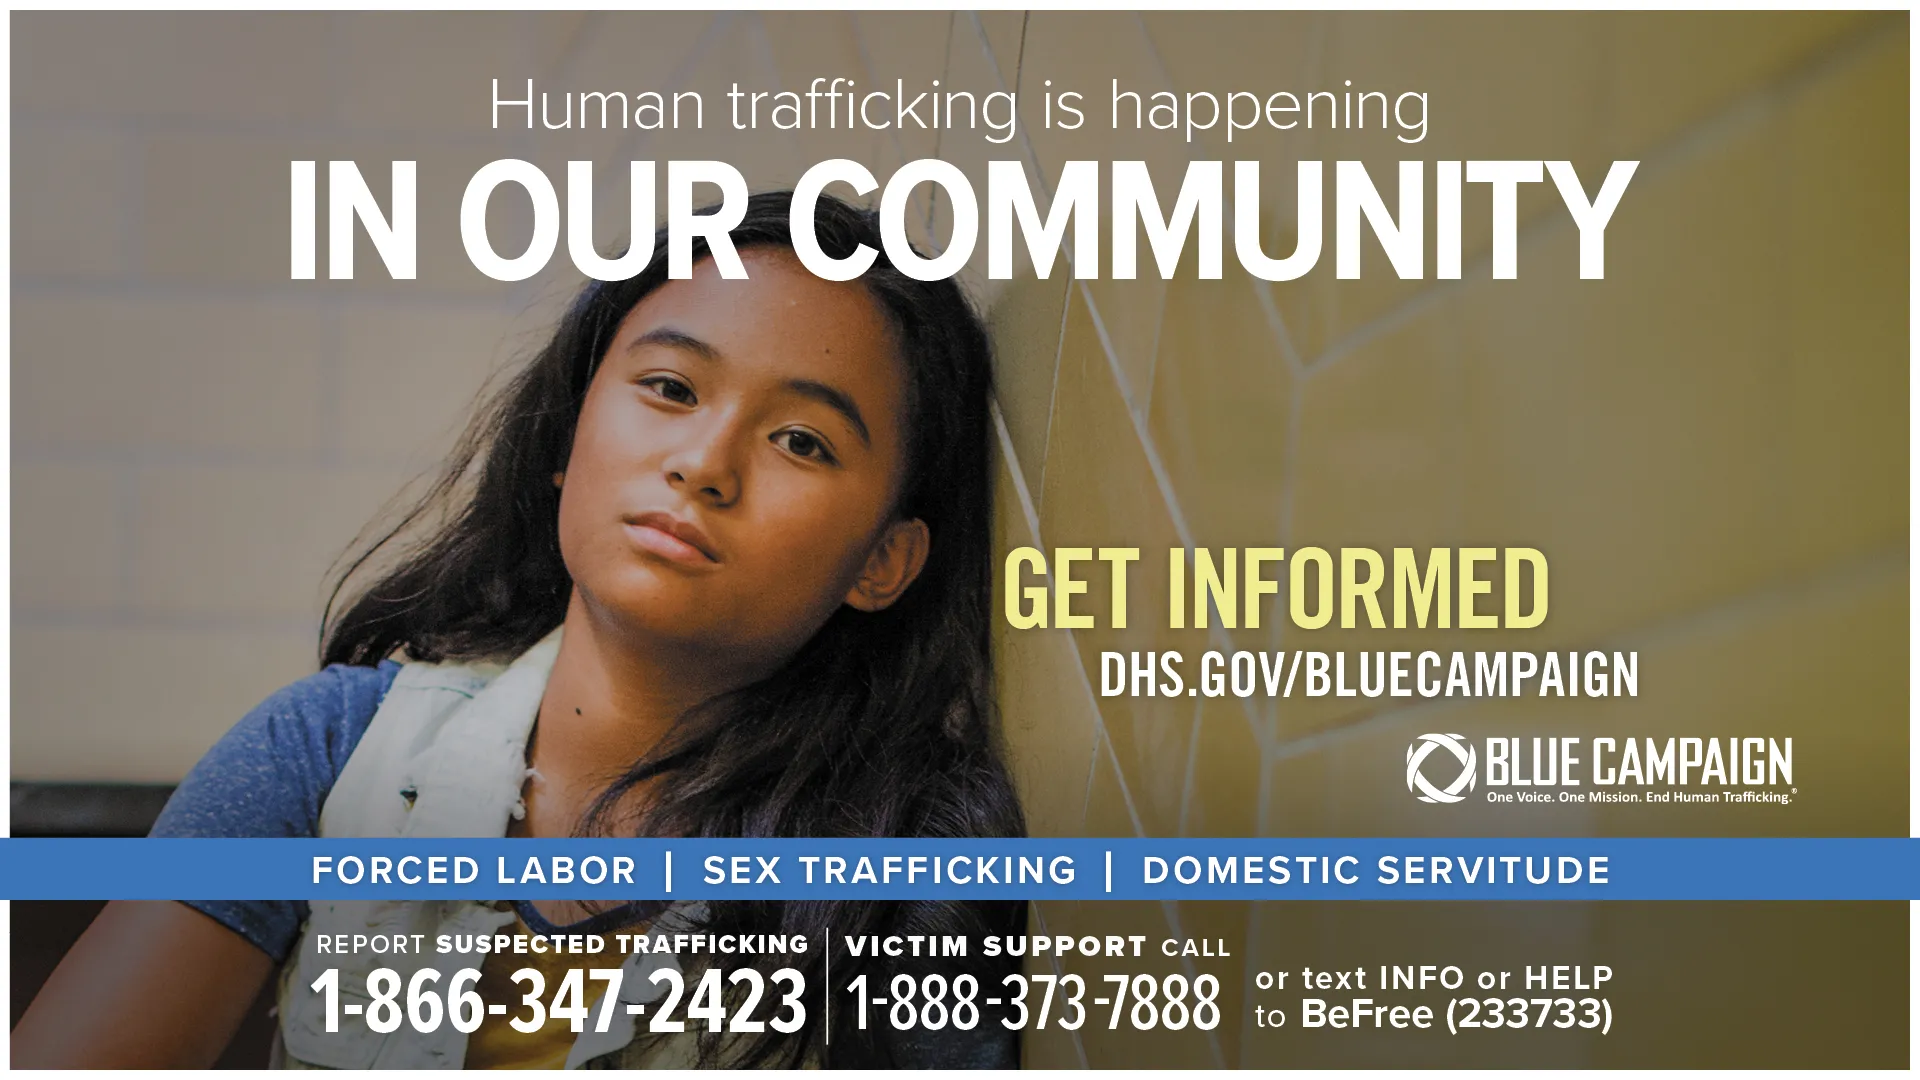 This poster shows a young girl sitting in a stairwell looking into the camera with a neutral expression with the text “Human trafficking is happening in our community. Get informed. DHS.gov/BlueCampaign. Forced Labor, Sex Trafficking, Domestic Servitude. Report suspected trafficking: 1-866-347-2423. Victim support call: 1-888-373-7888 or text INFO or HELP to BeFree (233733).”